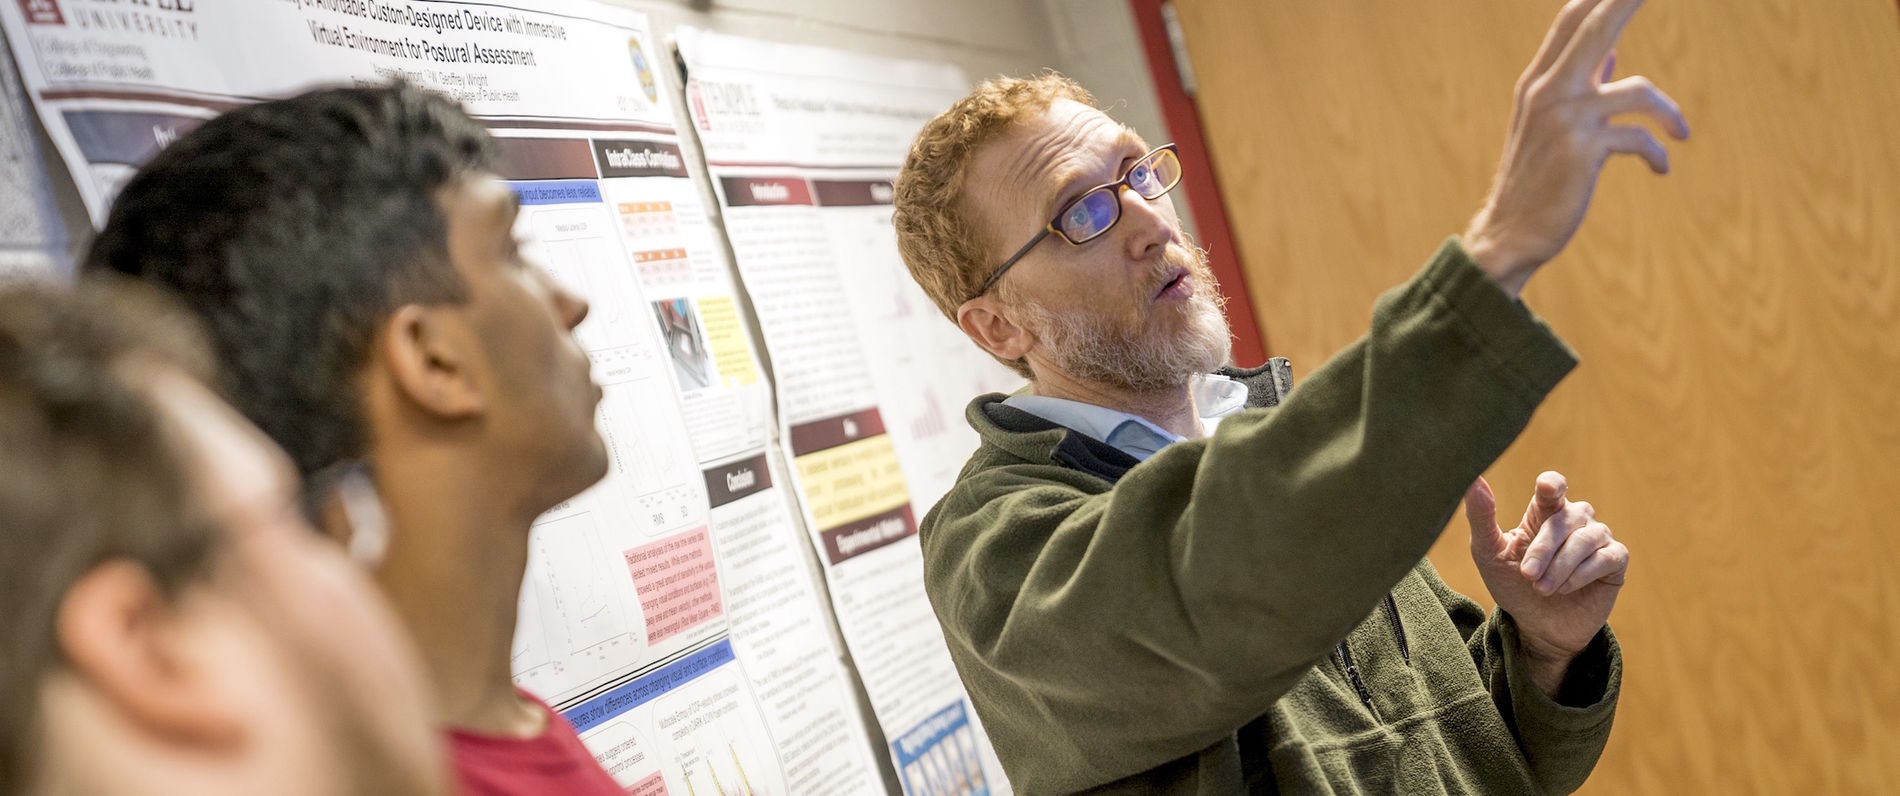 Professor Geoff Wright pointing at a research poster